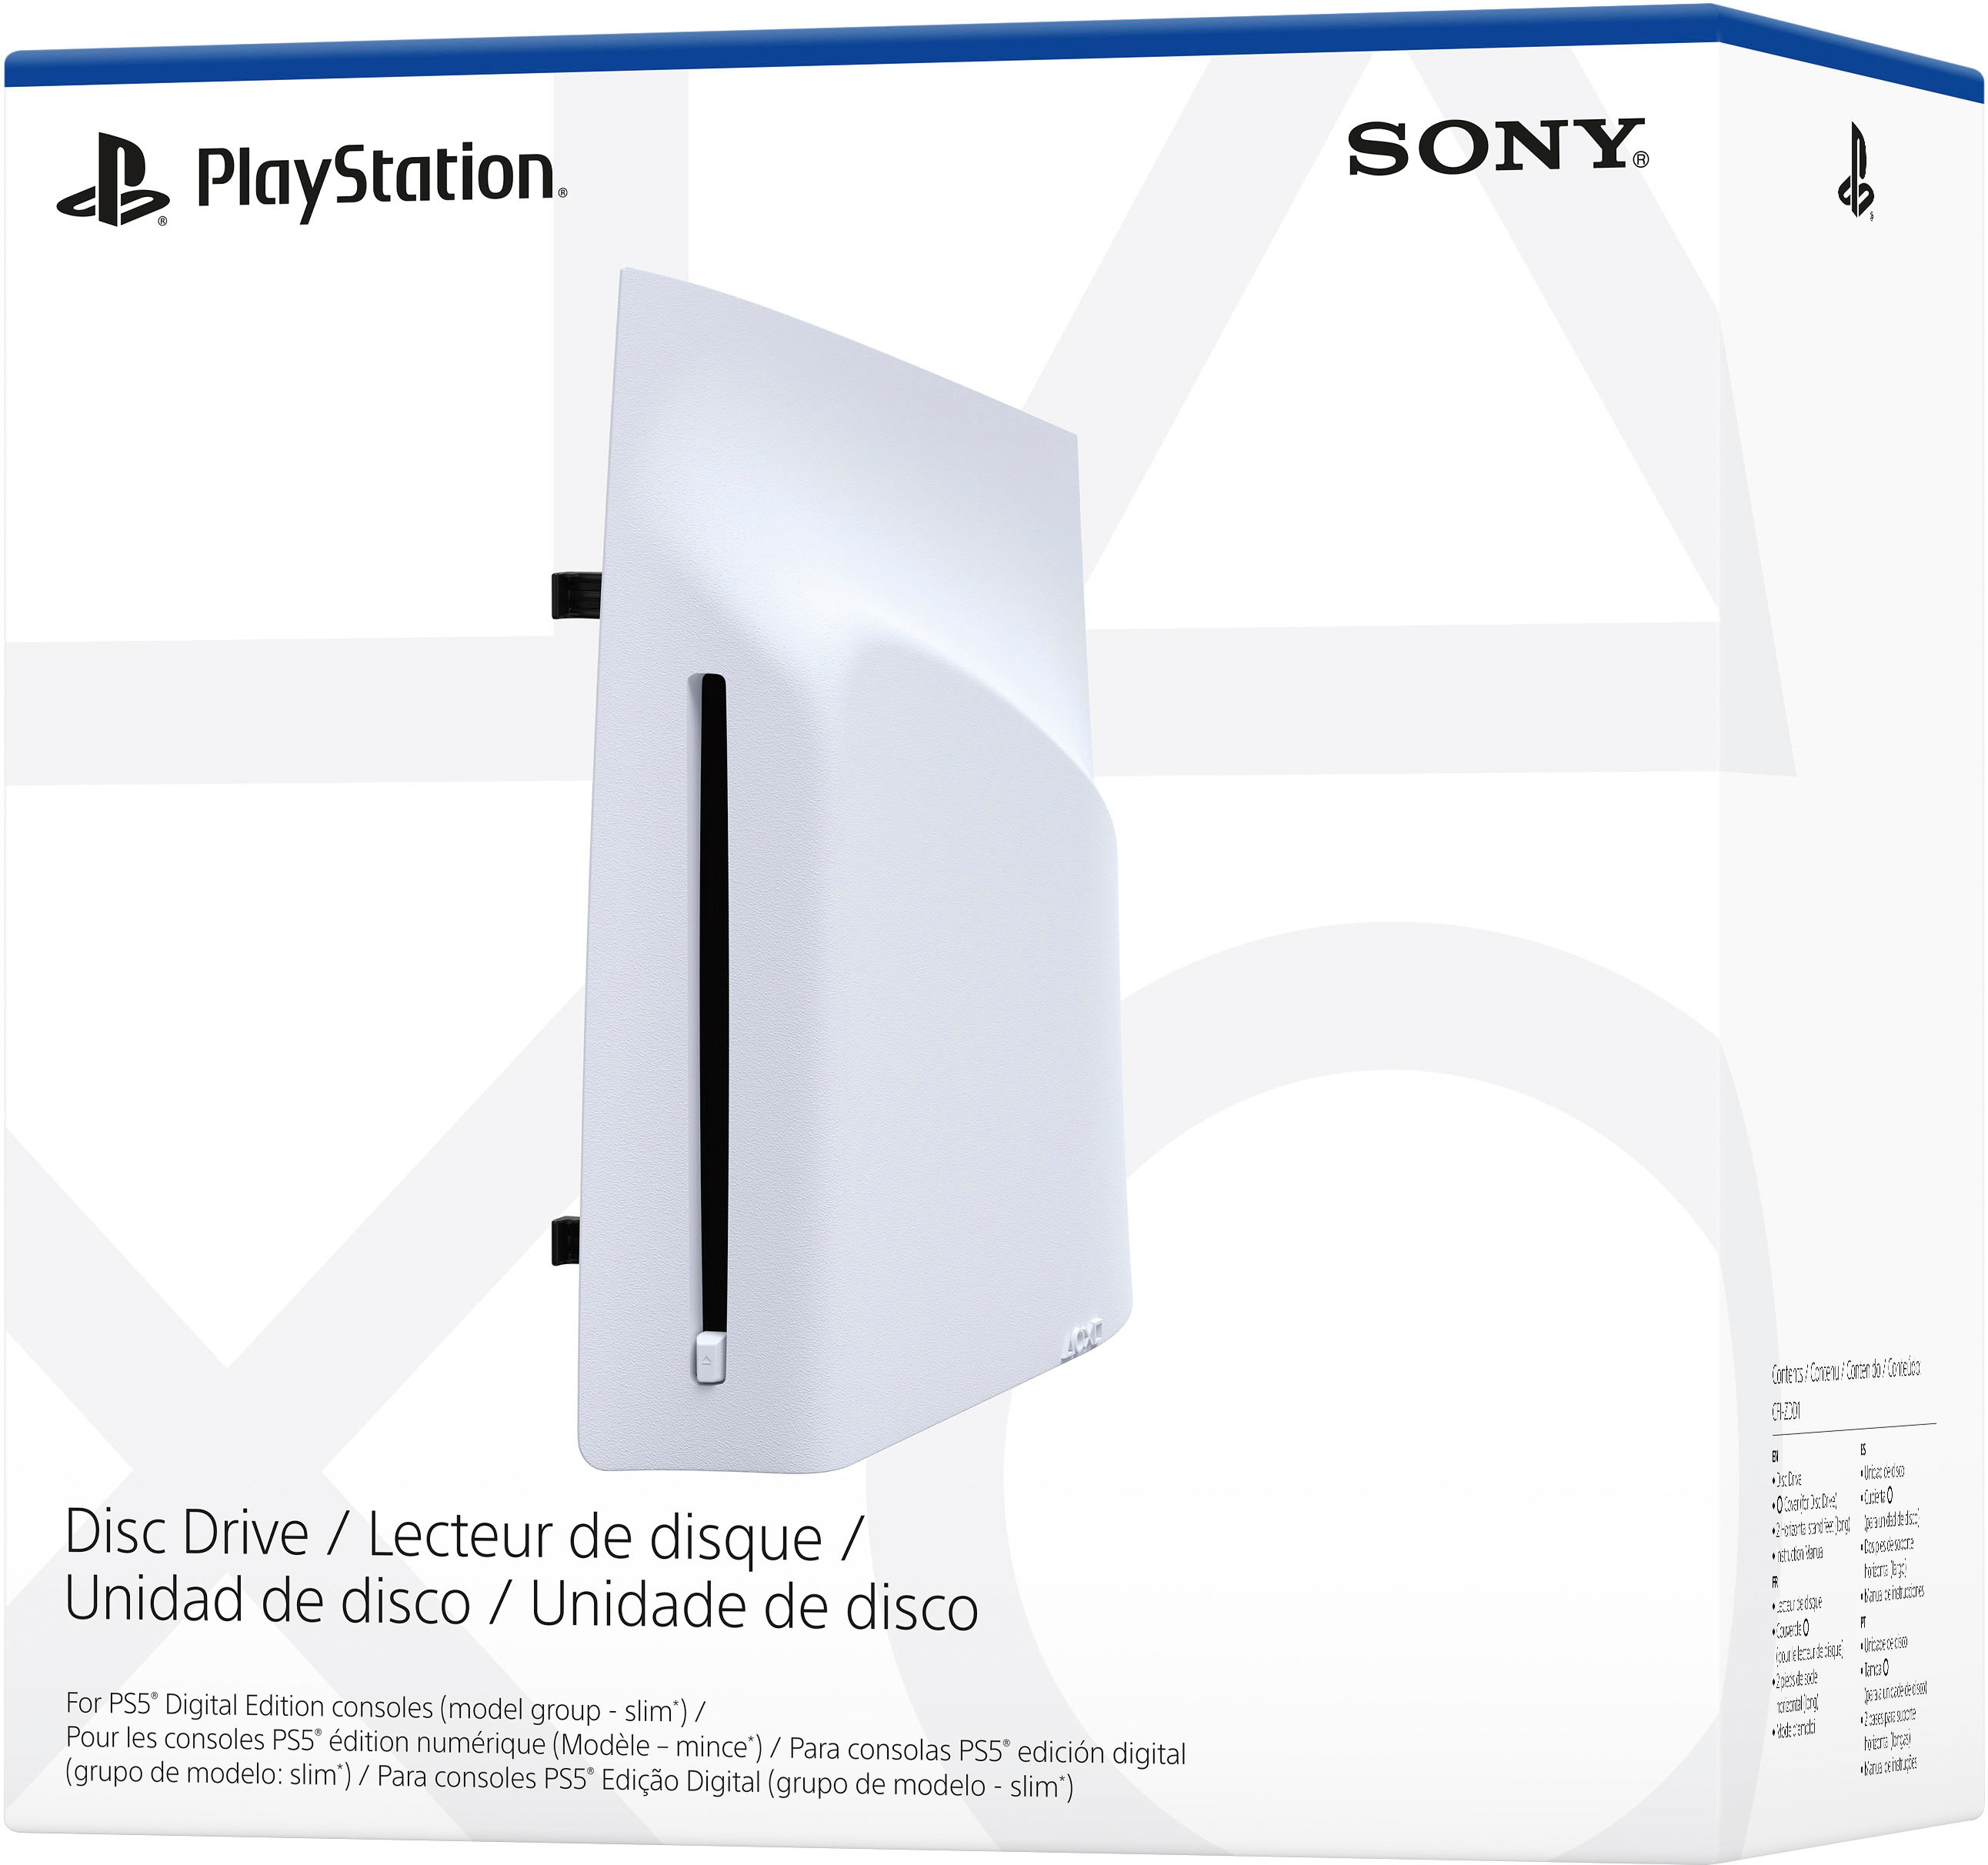 Sony Interactive Entertainment Disc Drive For PS5 Digital Edition